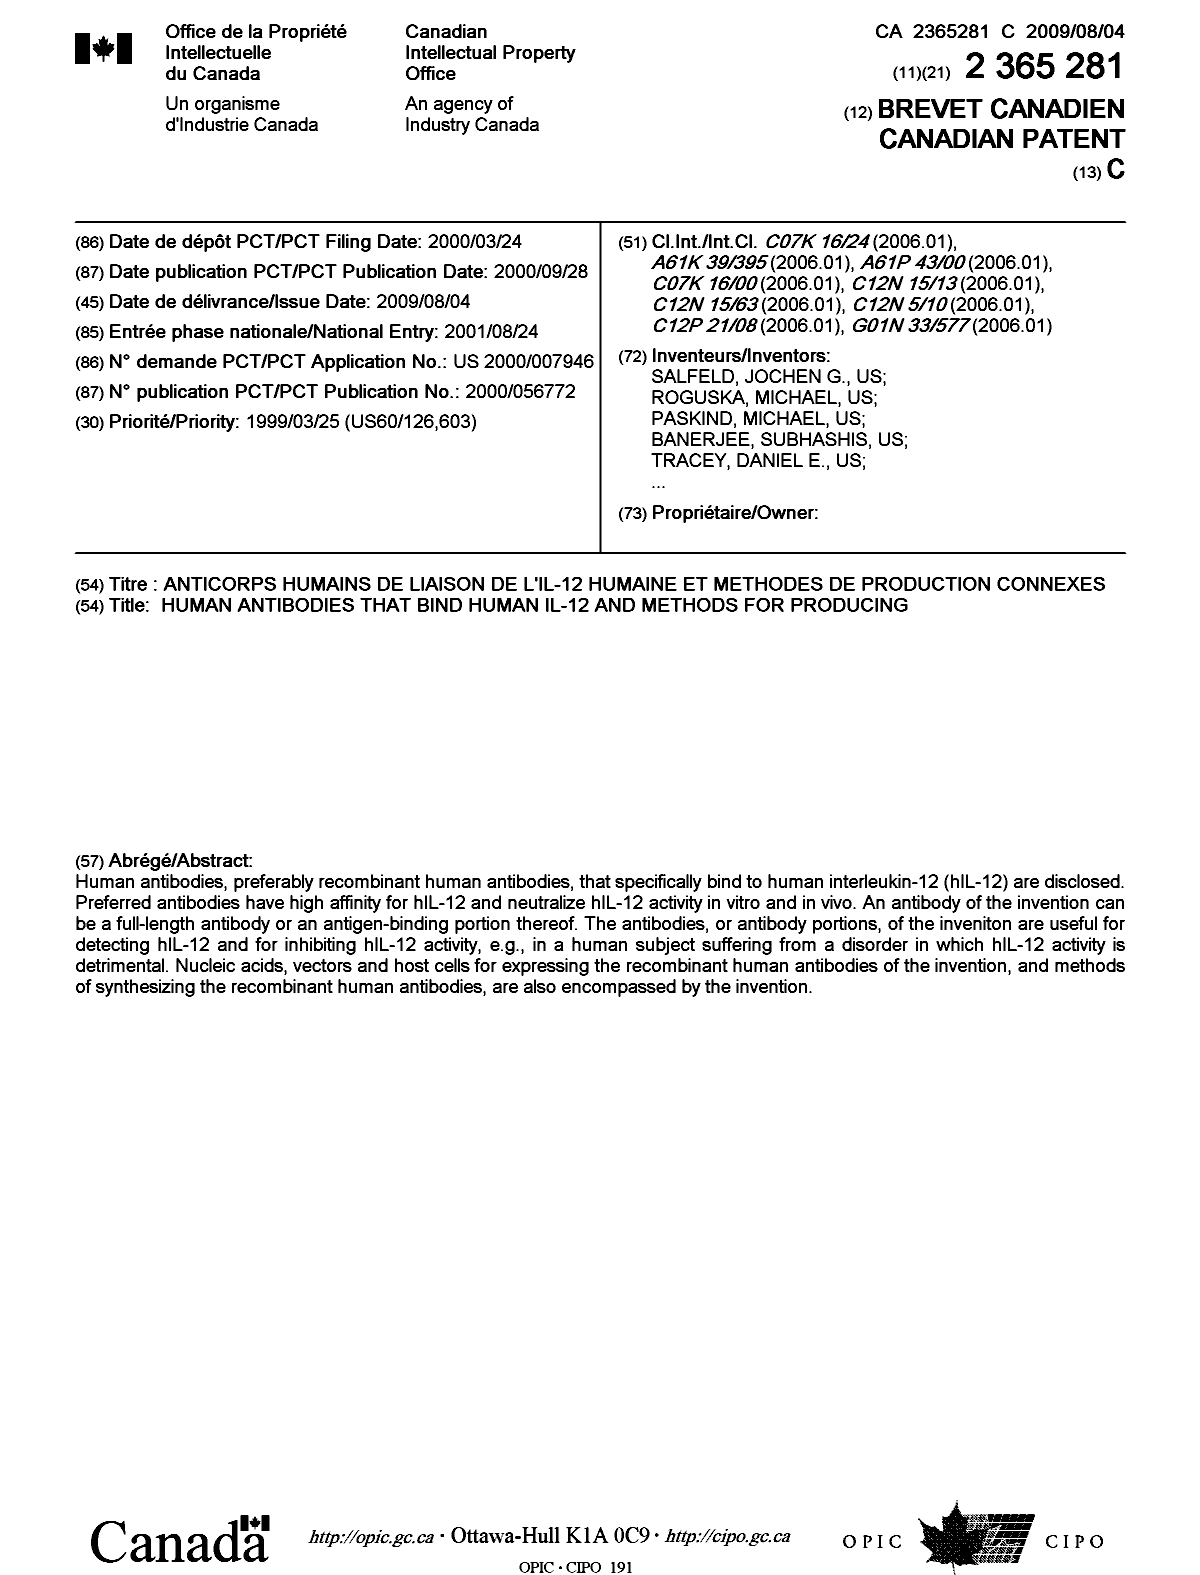 Canadian Patent Document 2365281. Cover Page 20081207. Image 1 of 2